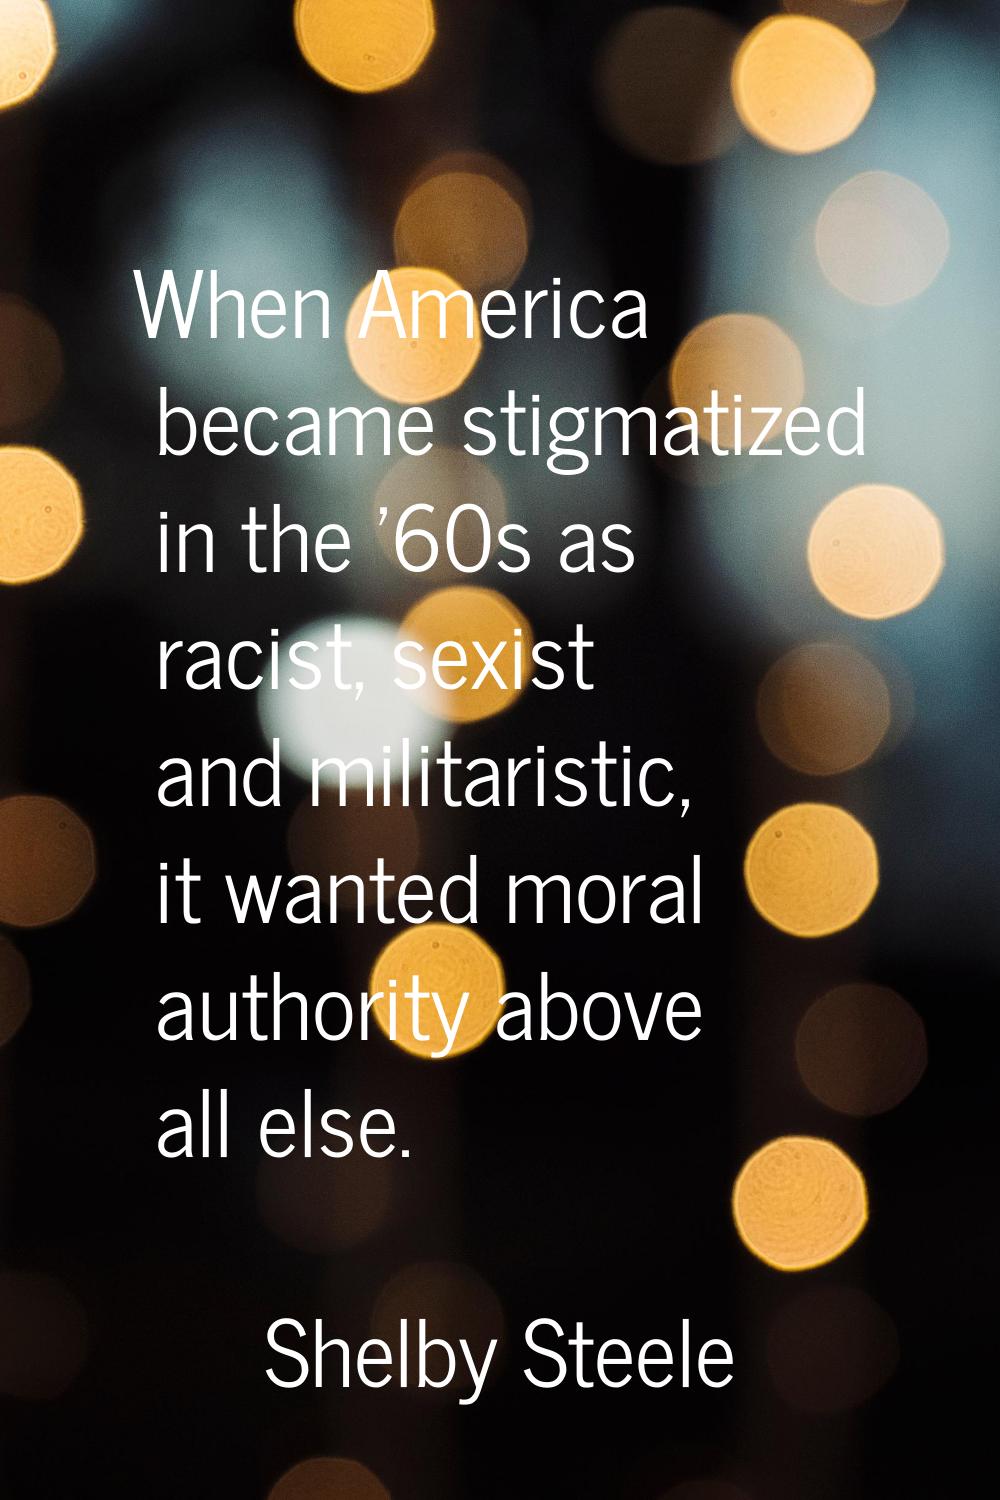 When America became stigmatized in the '60s as racist, sexist and militaristic, it wanted moral aut